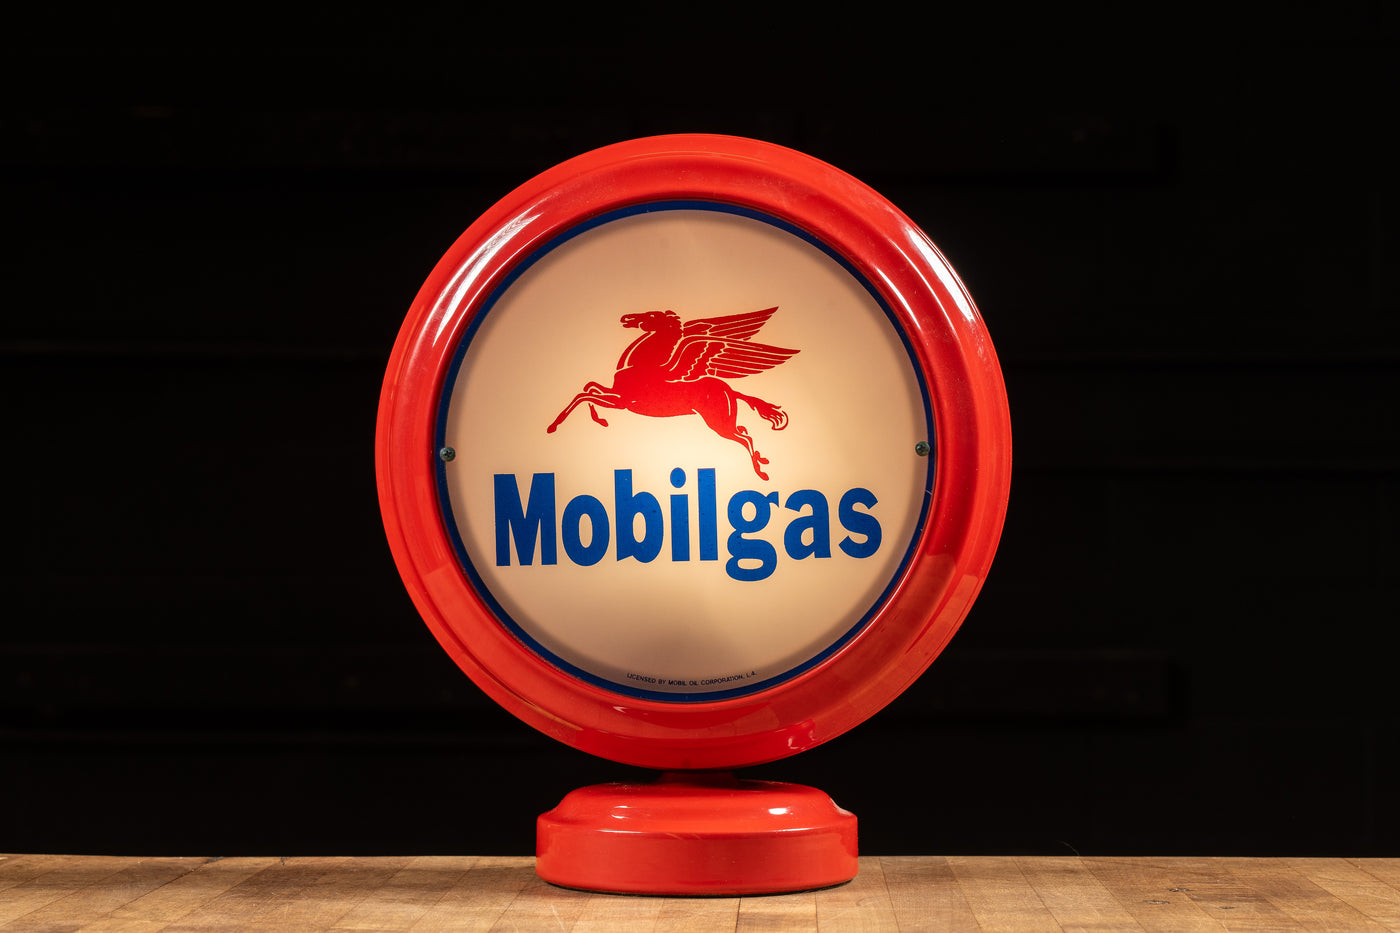 Reproduction Mobilgas Lighted Service Station Pump Globe